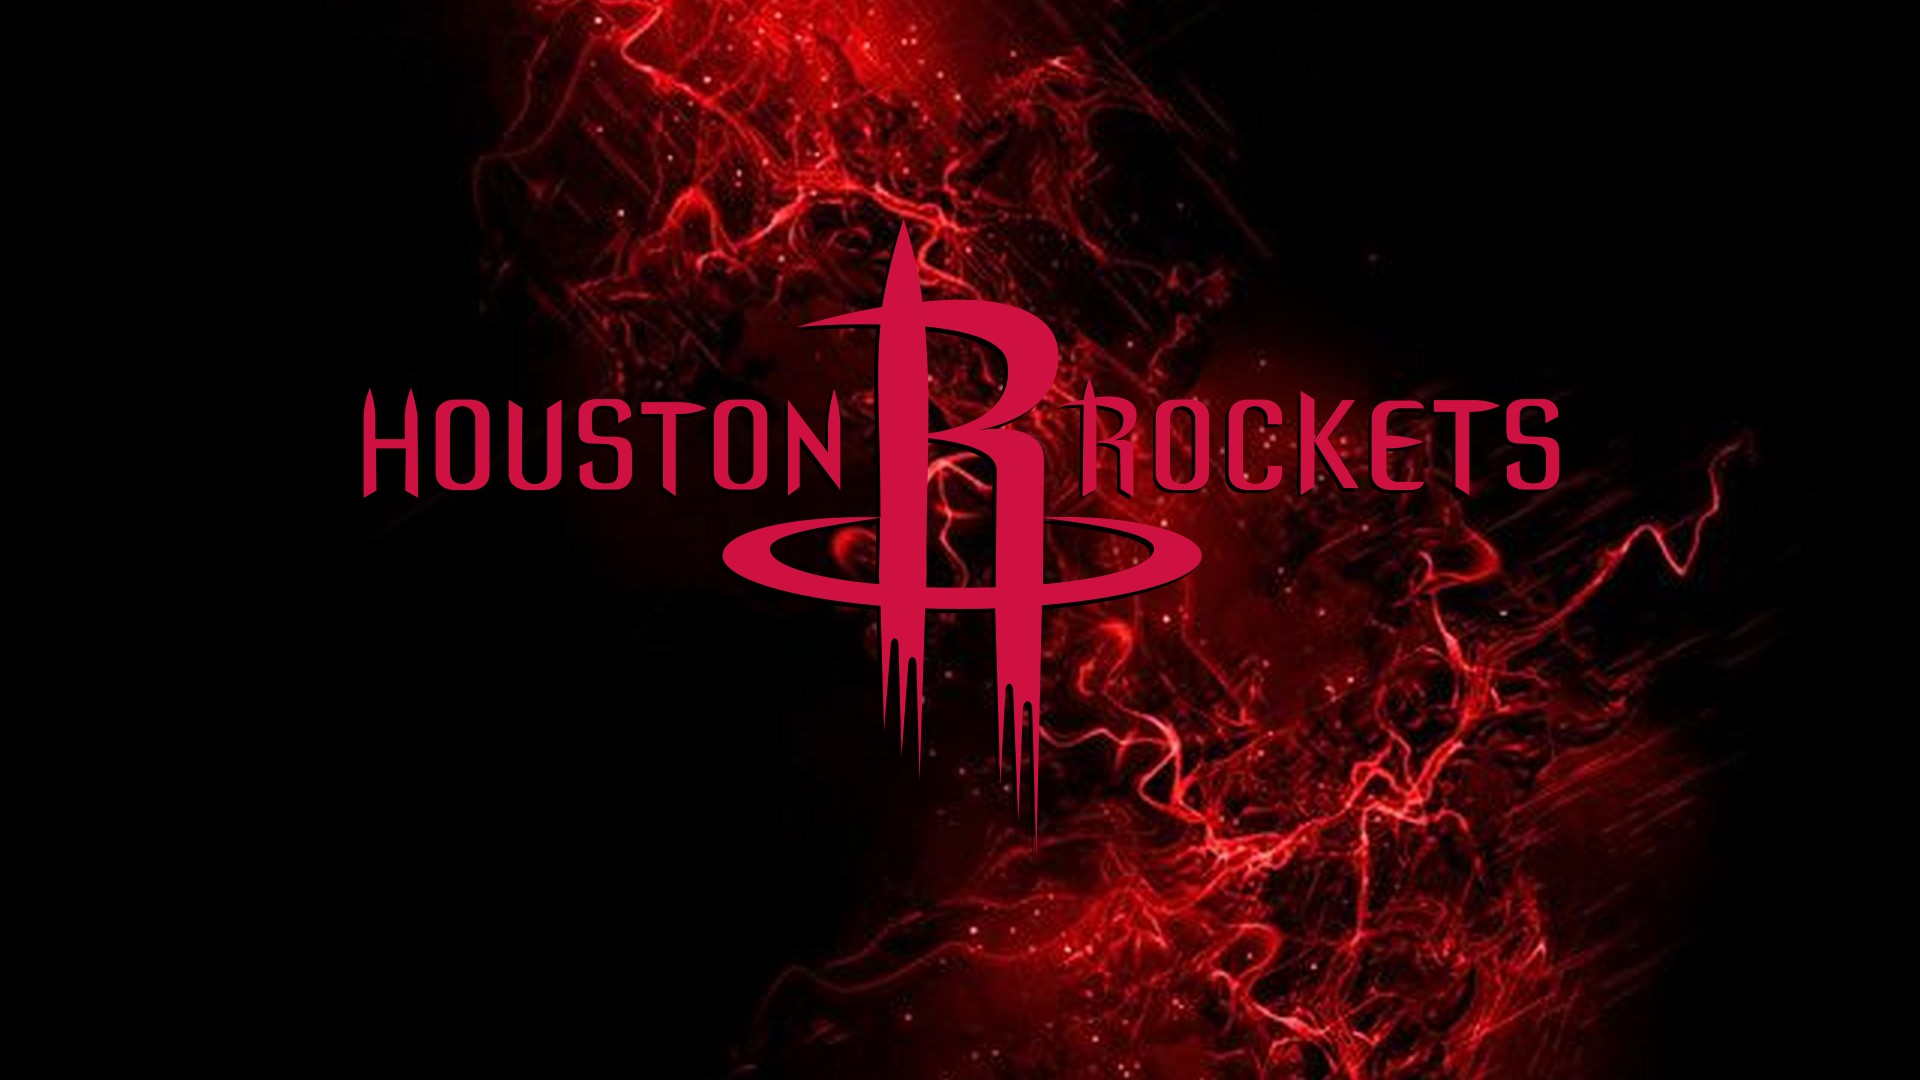 HD Rockets Backgrounds with image dimensions 1920x1080 pixel. You can make this wallpaper for your Desktop Computer Backgrounds, Windows or Mac Screensavers, iPhone Lock screen, Tablet or Android and another Mobile Phone device